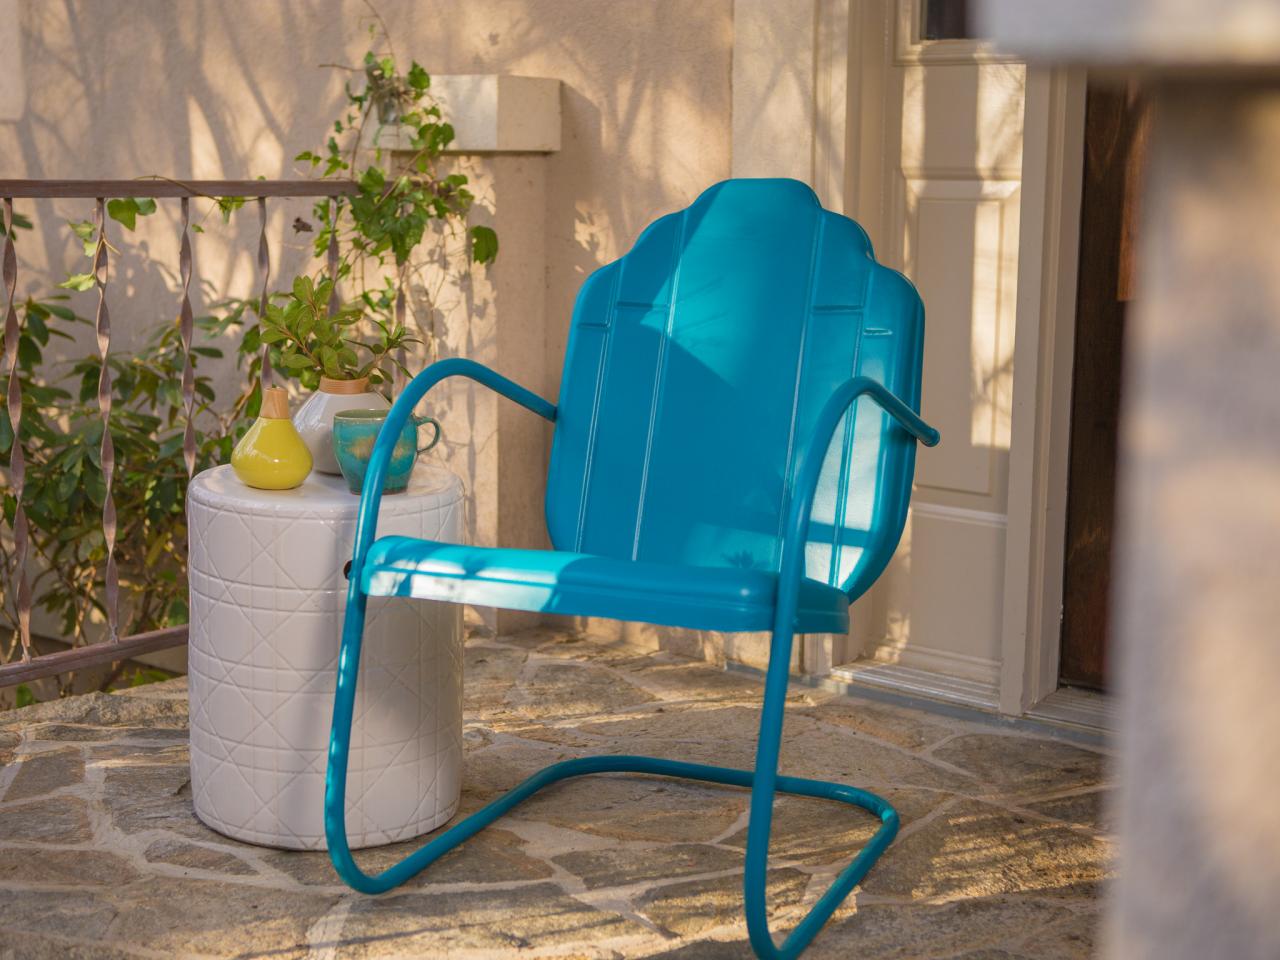 How To Paint An Outdoor Metal Chair, Best Spray Paint For Metal Lawn Furniture